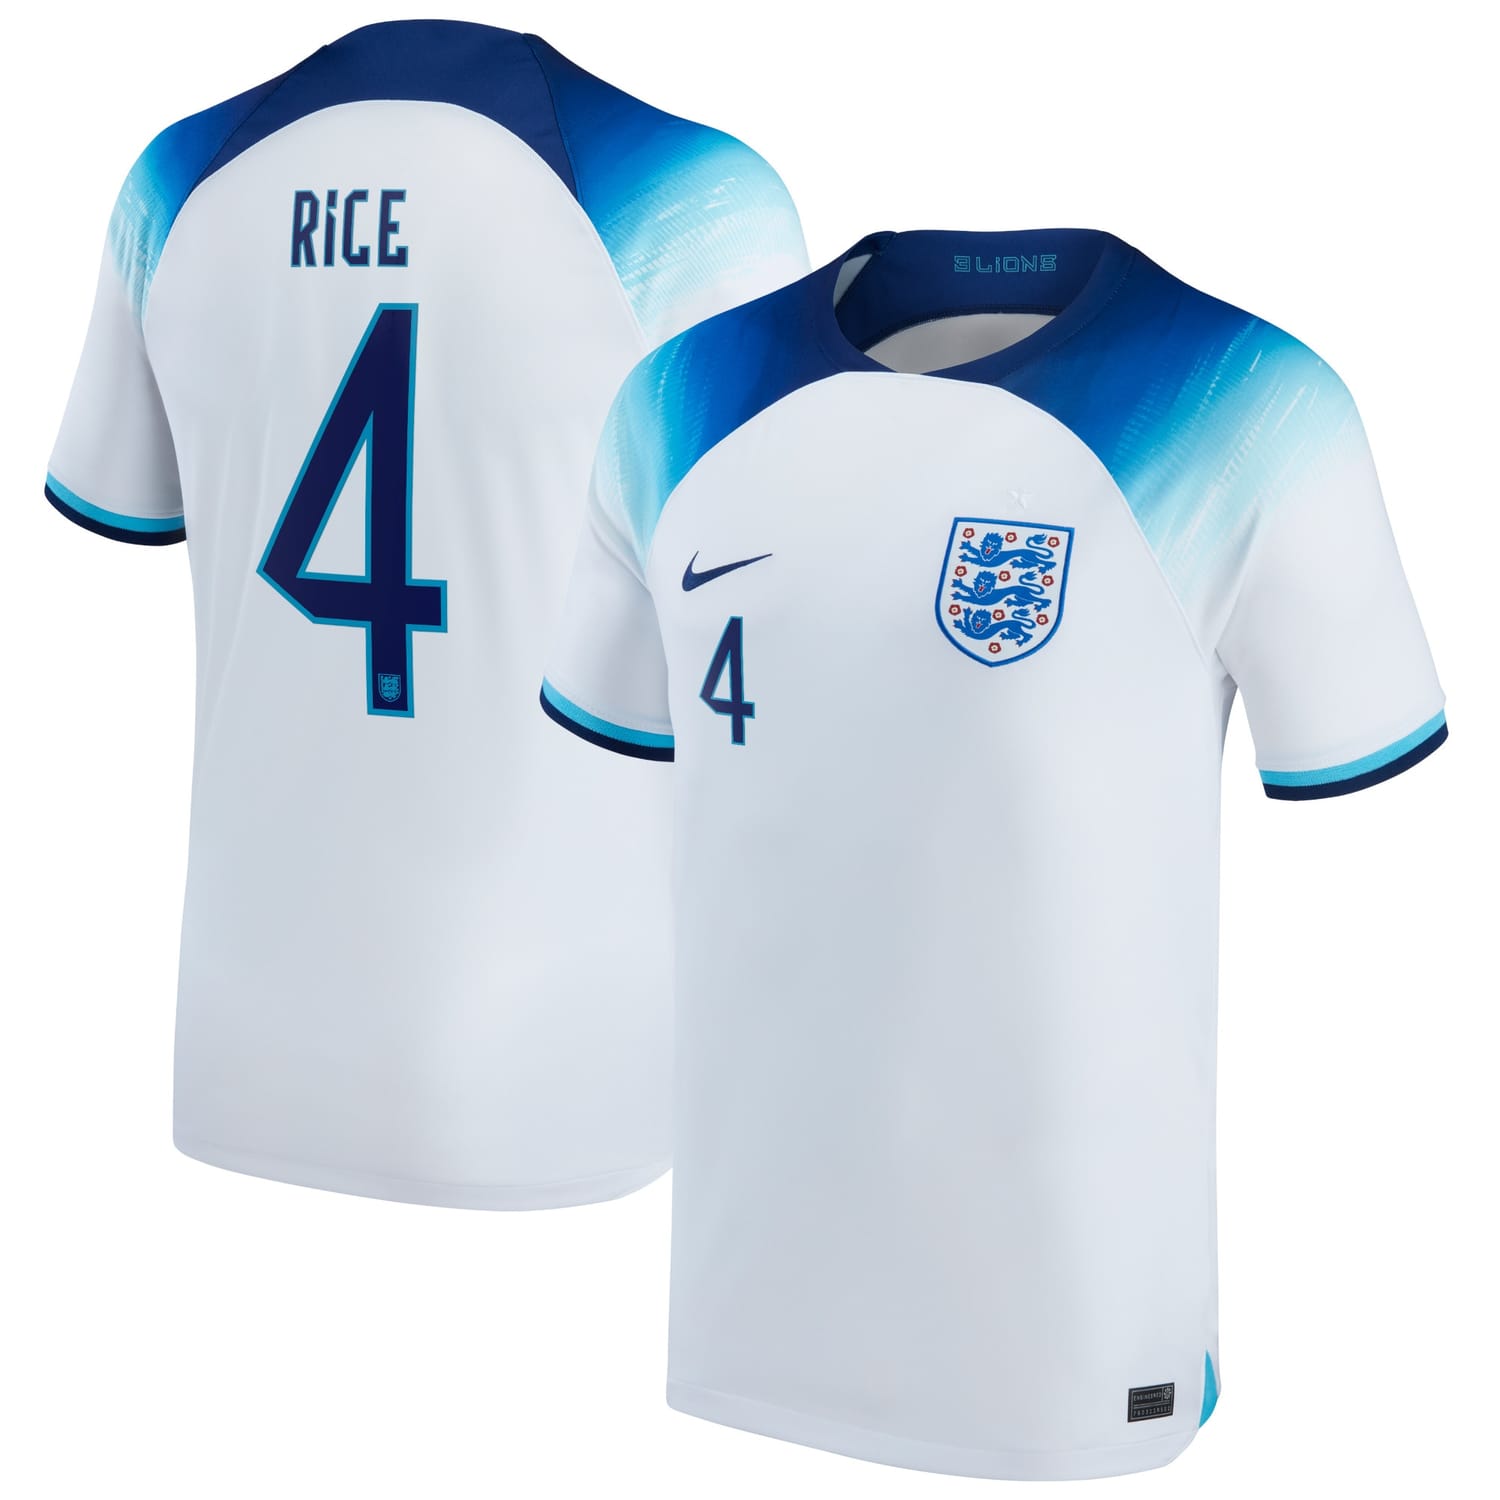 England National Team Home Jersey Shirt 2022 player Declan Rice 4 printing for Men